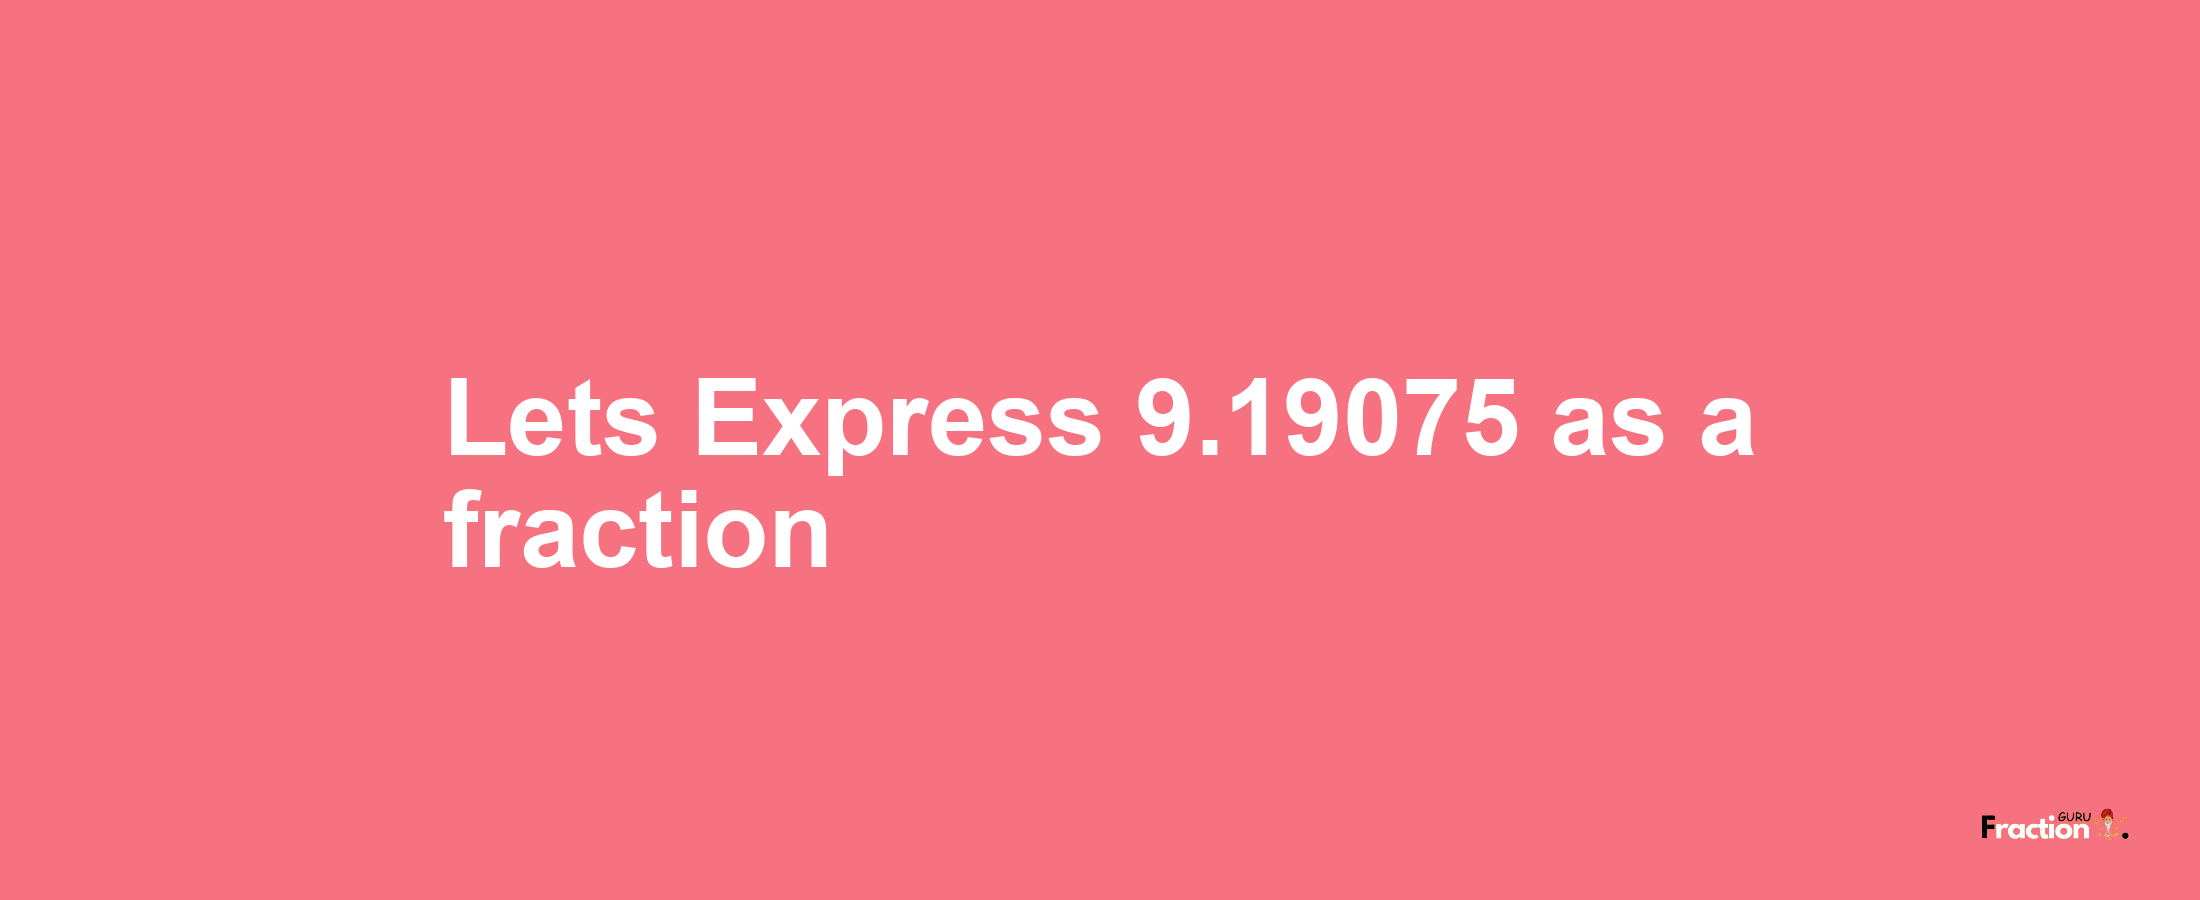 Lets Express 9.19075 as afraction